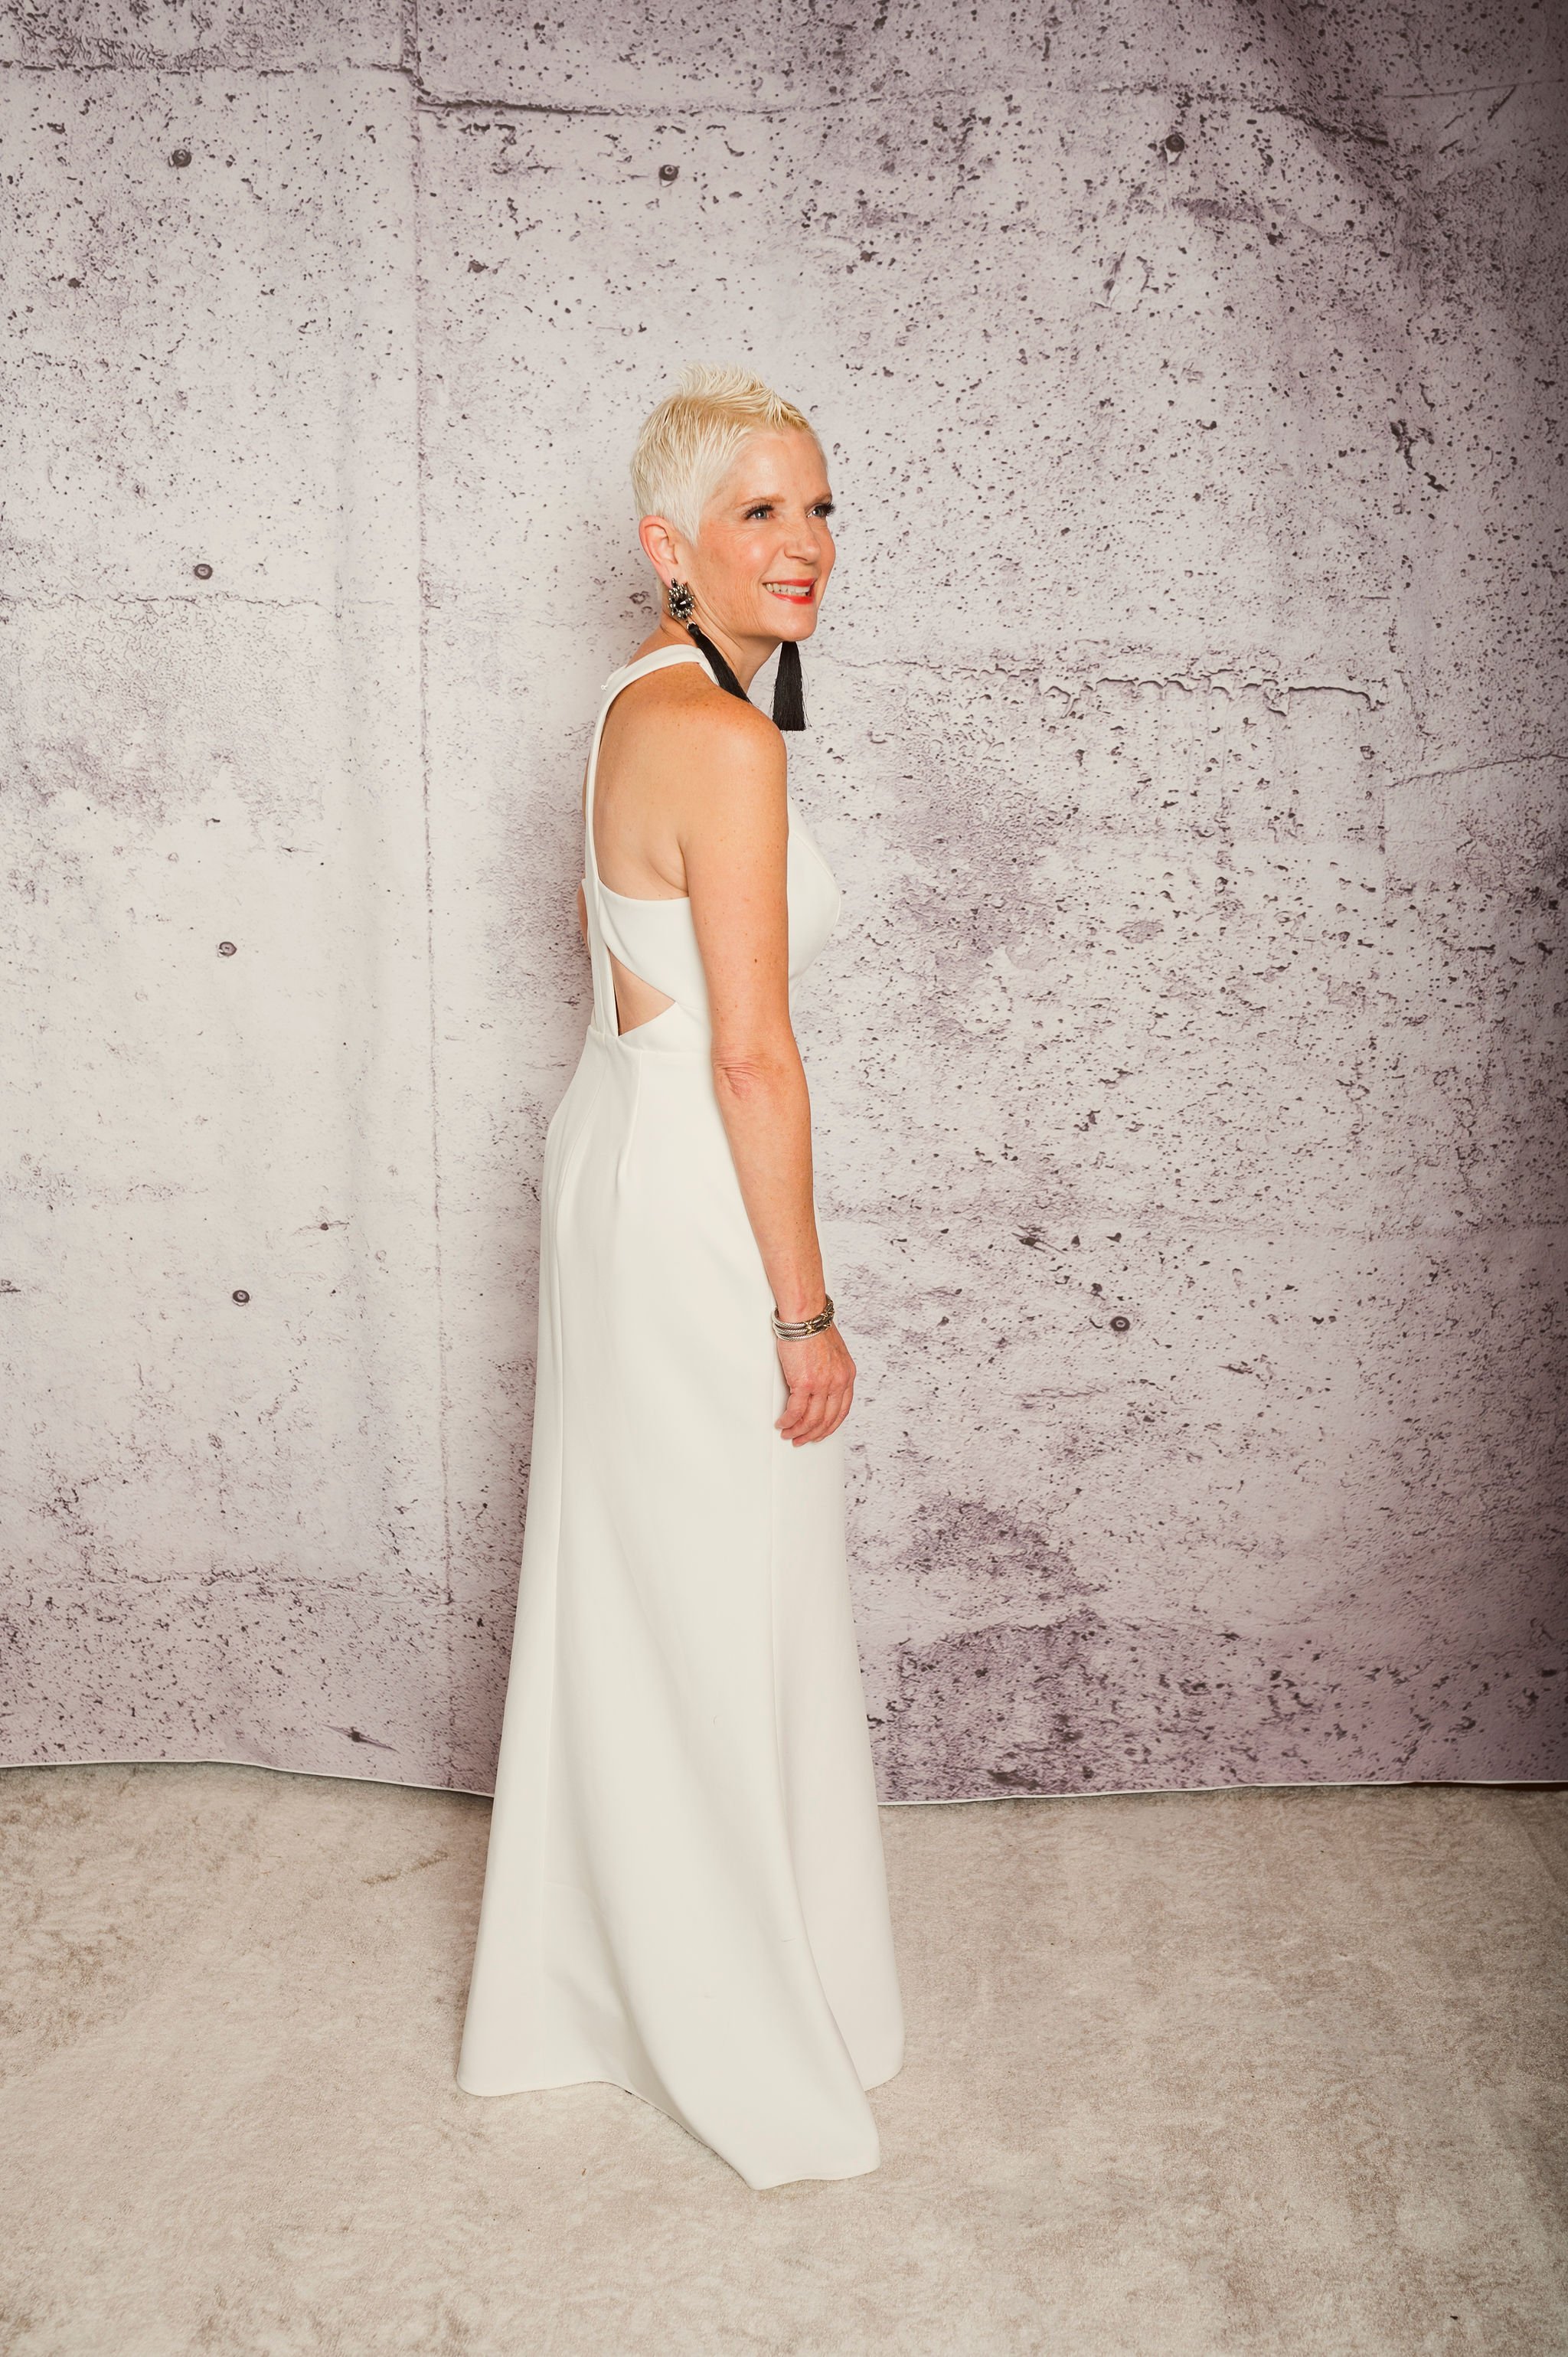  Amanda in glamorous white gown for gala/holiday season. What a statement! 